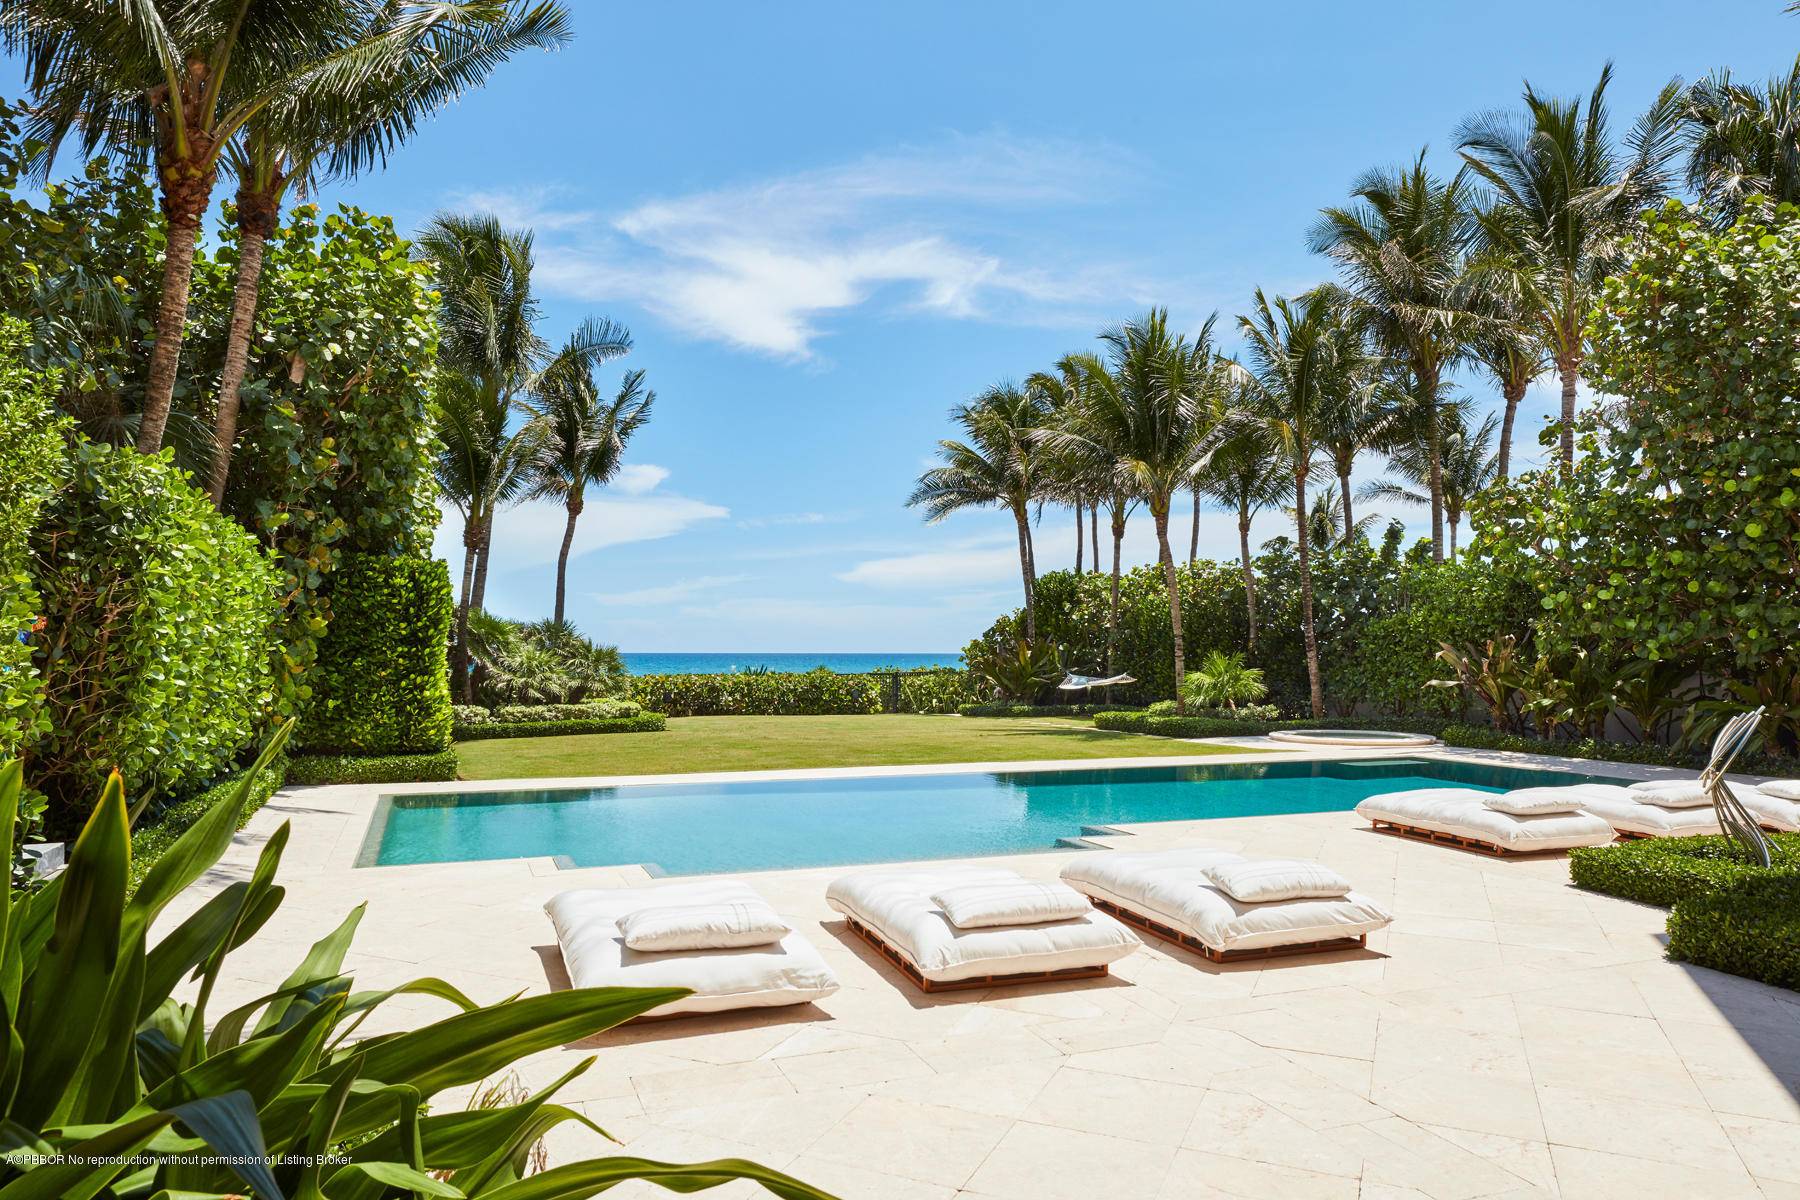 This sensational direct oceanfront property is located in Juno Beach, Florida and has breathtaking views of the Atlantic Ocean from all major rooms, and the pool and spa.